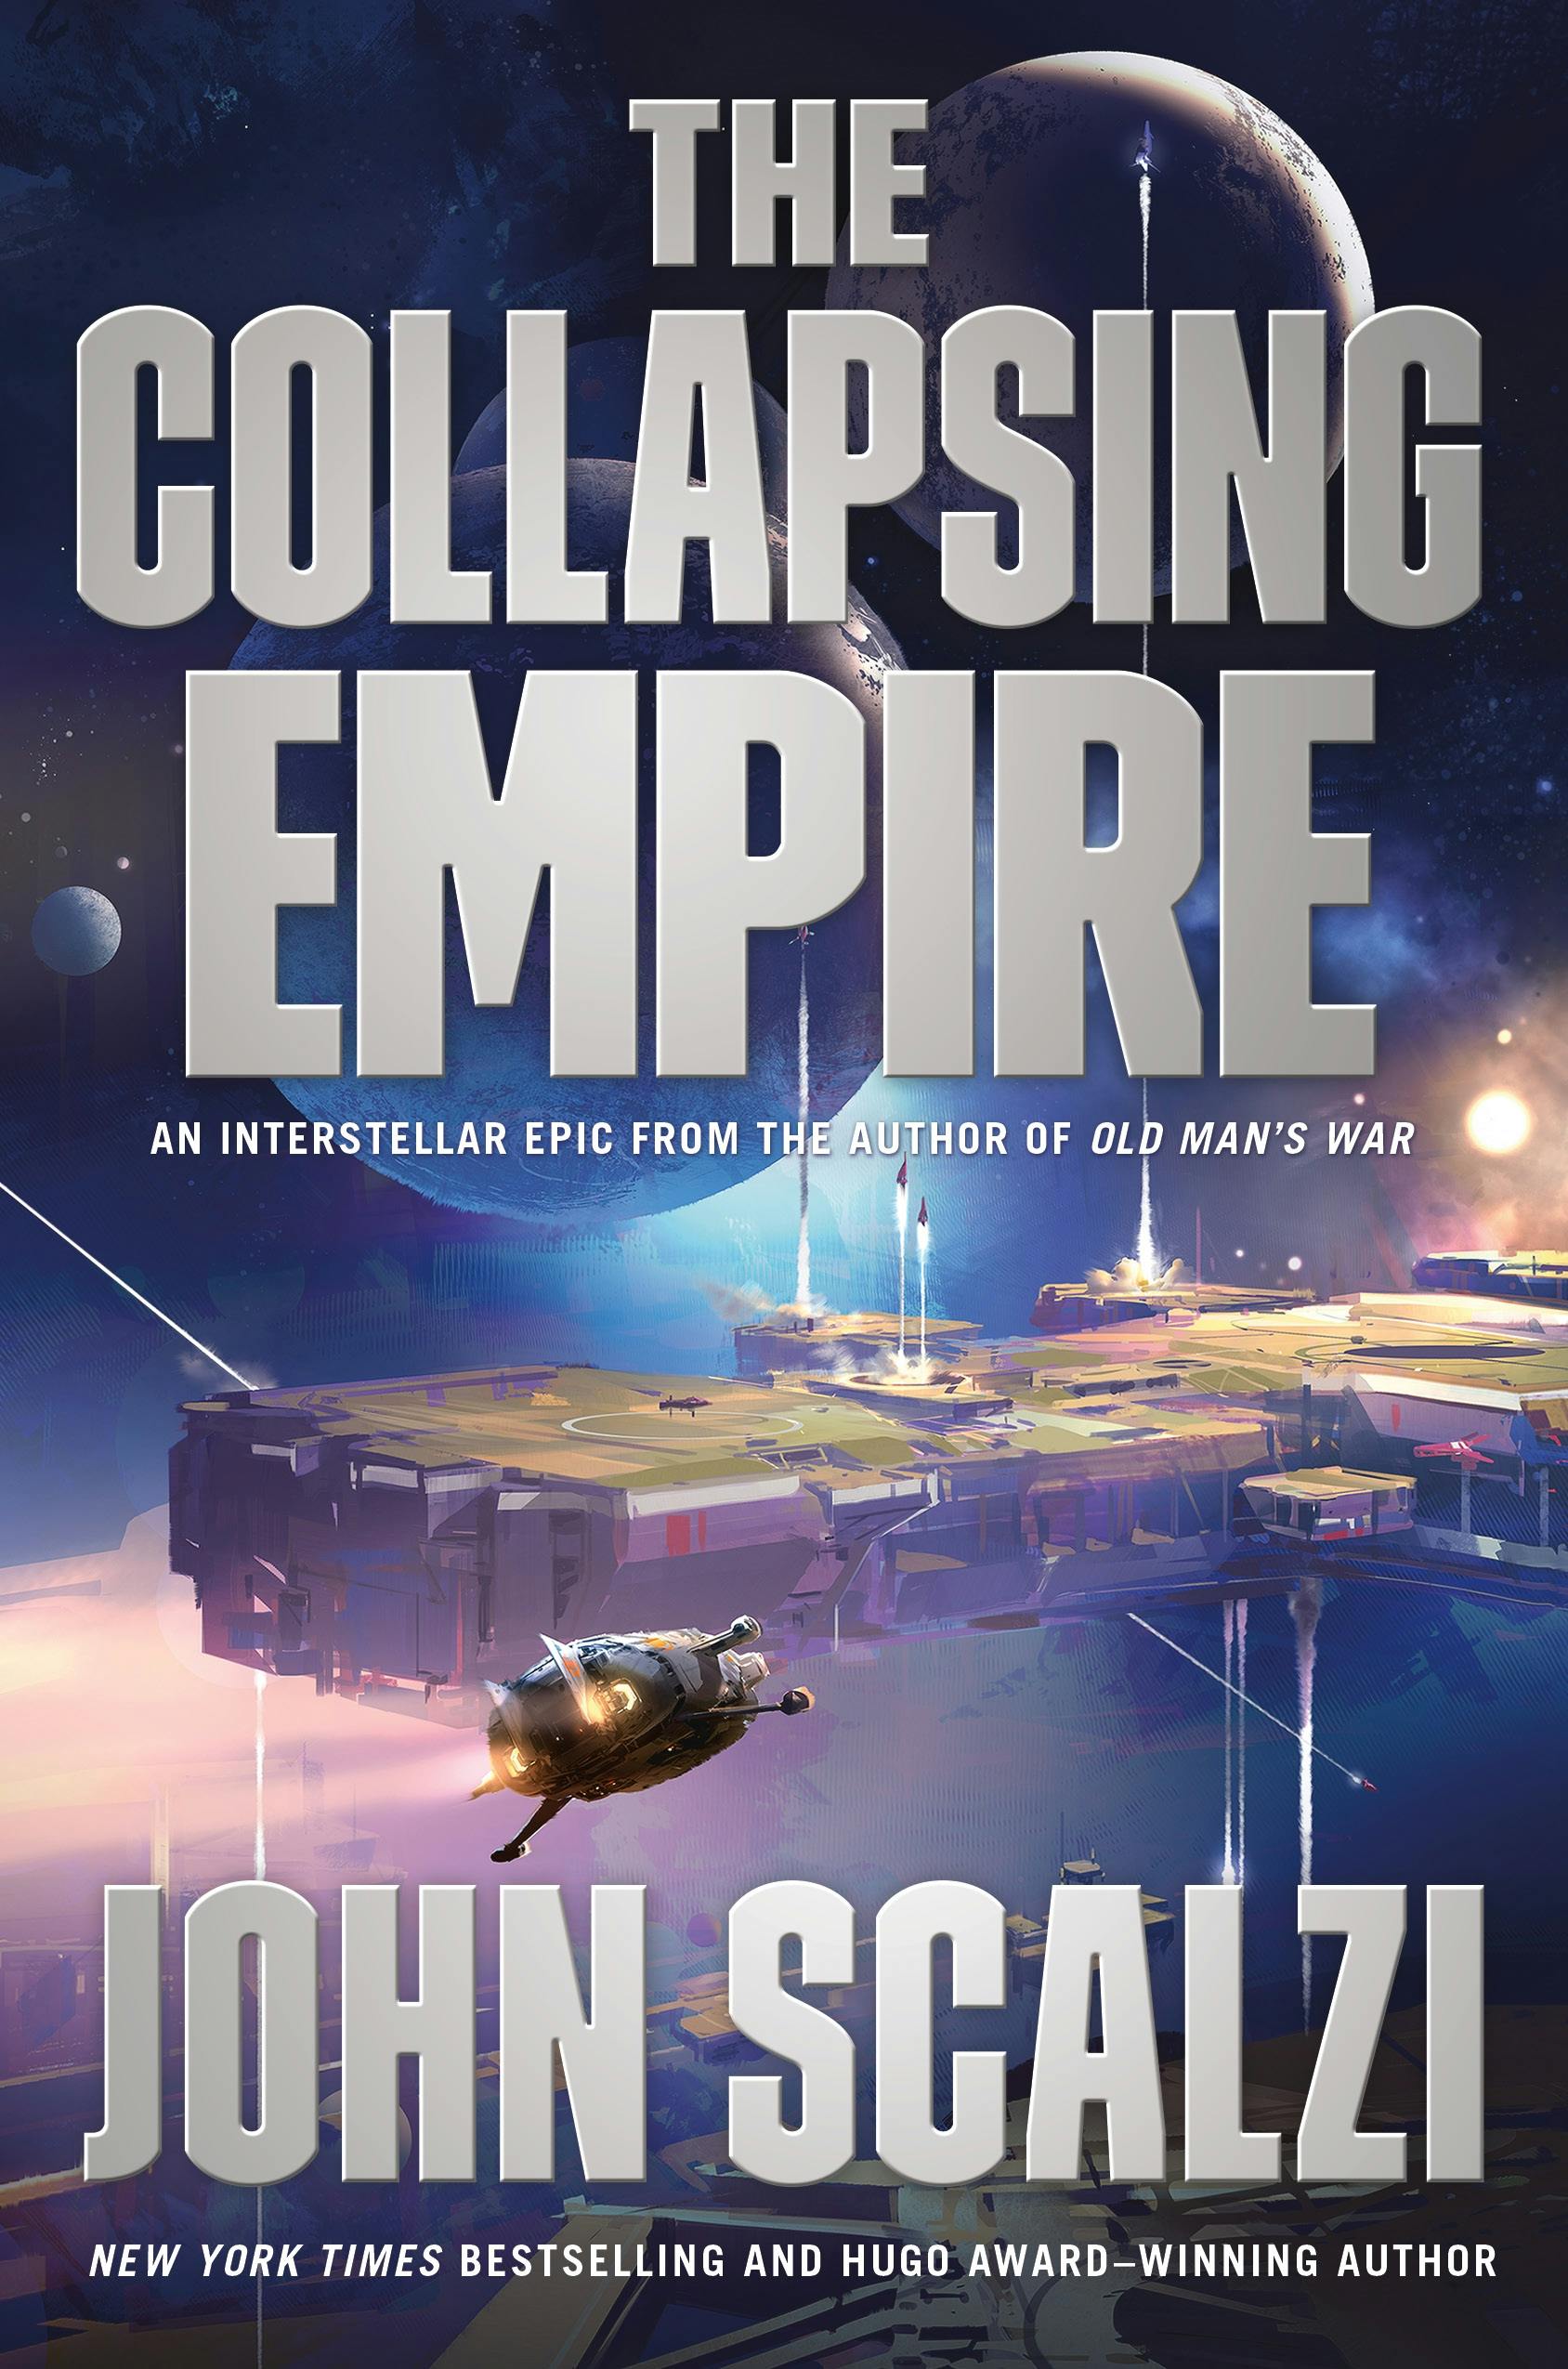 Cover for the book titled as: The Collapsing Empire